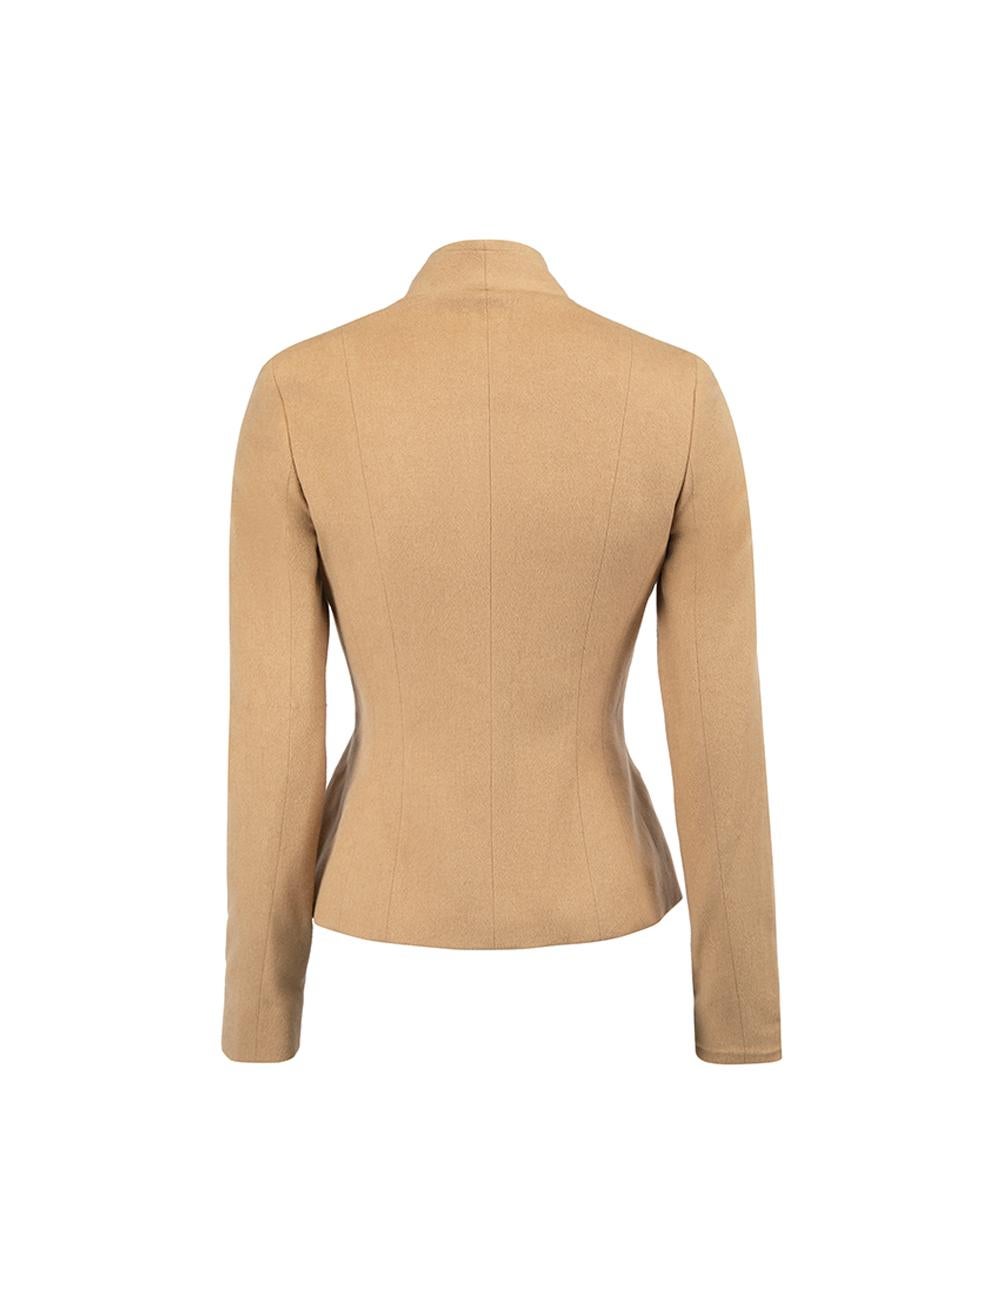 Pre-Loved Christian Dior Boutique Women's Vintage Camel Fitted Evening Jacket In Excellent Condition In London, GB